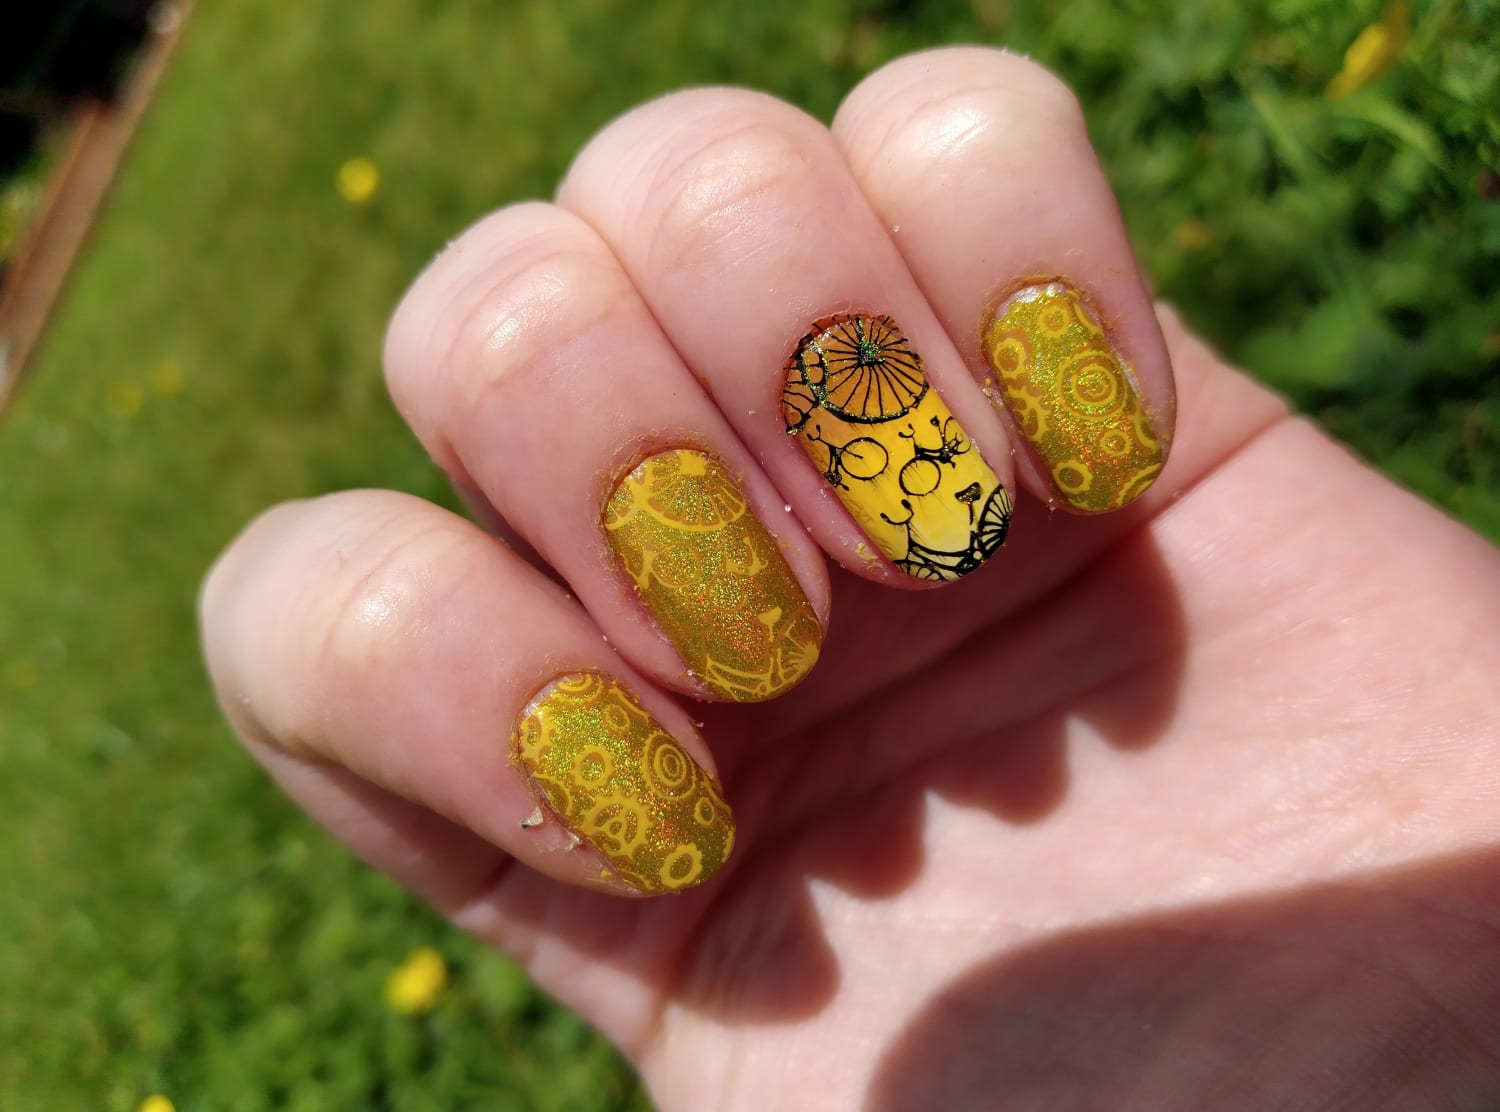 Tour De France nails for this year. Time to use literally all my yellow polishes!